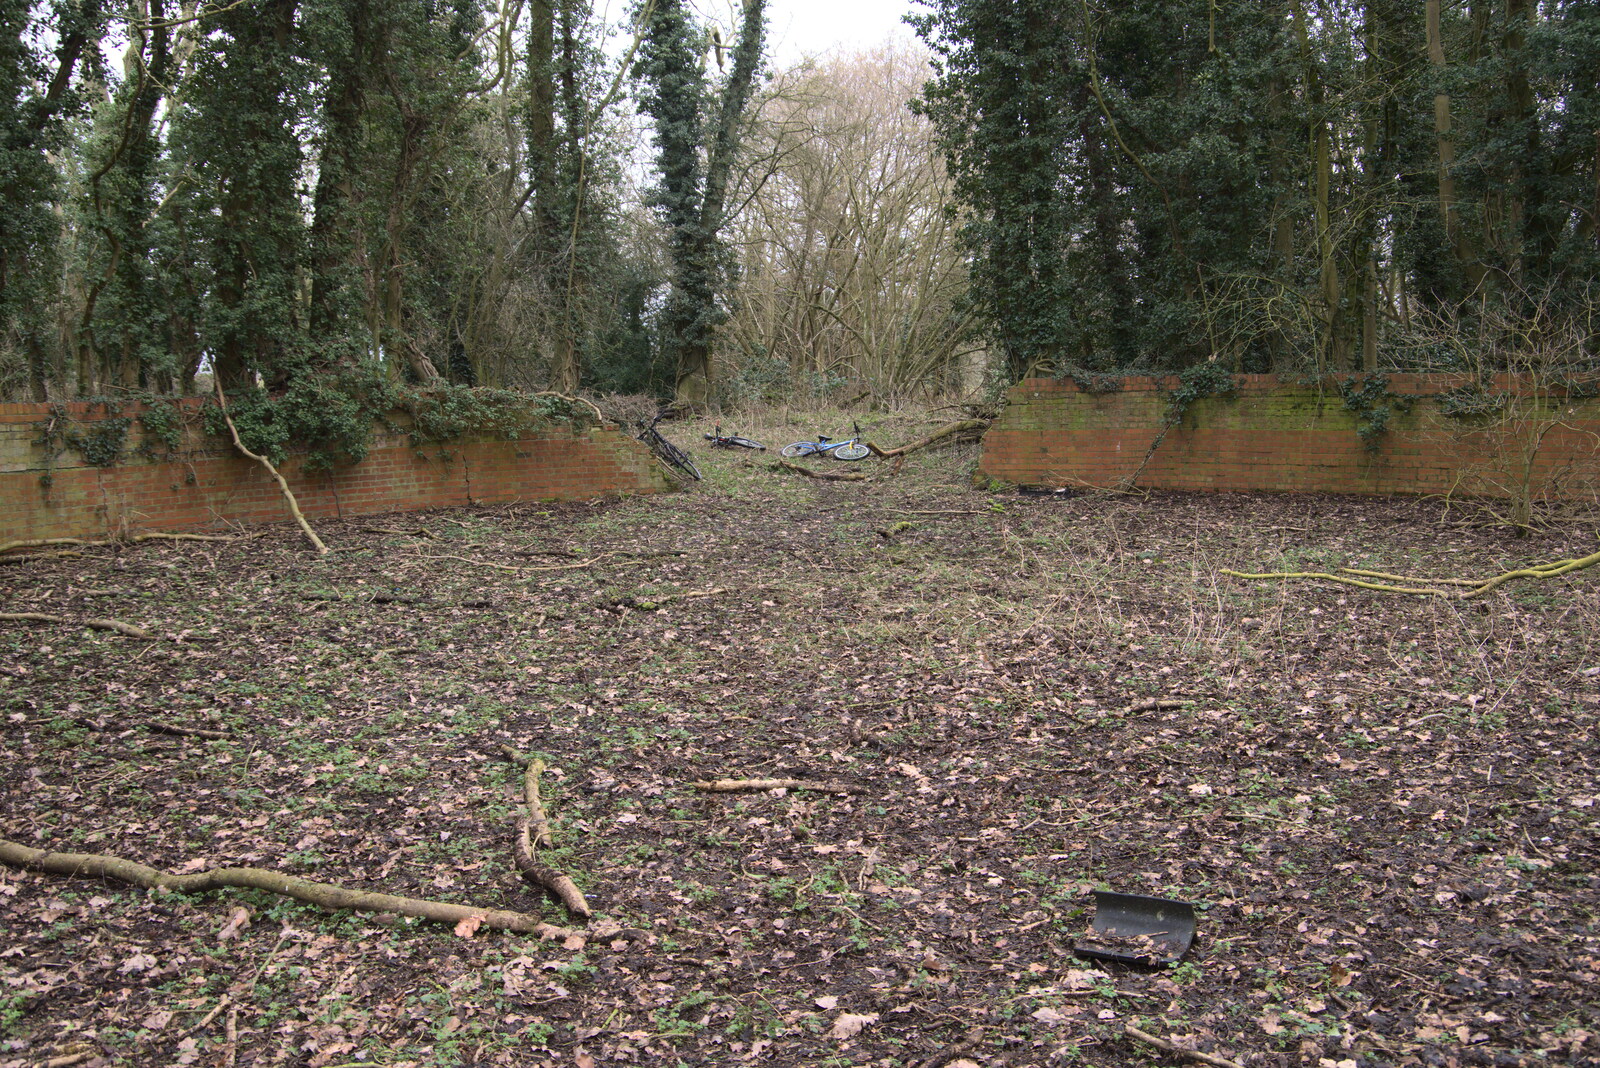 The break in the wall from The Old Sewage Works, The Avenue, Brome, Suffolk - 20th February 2021